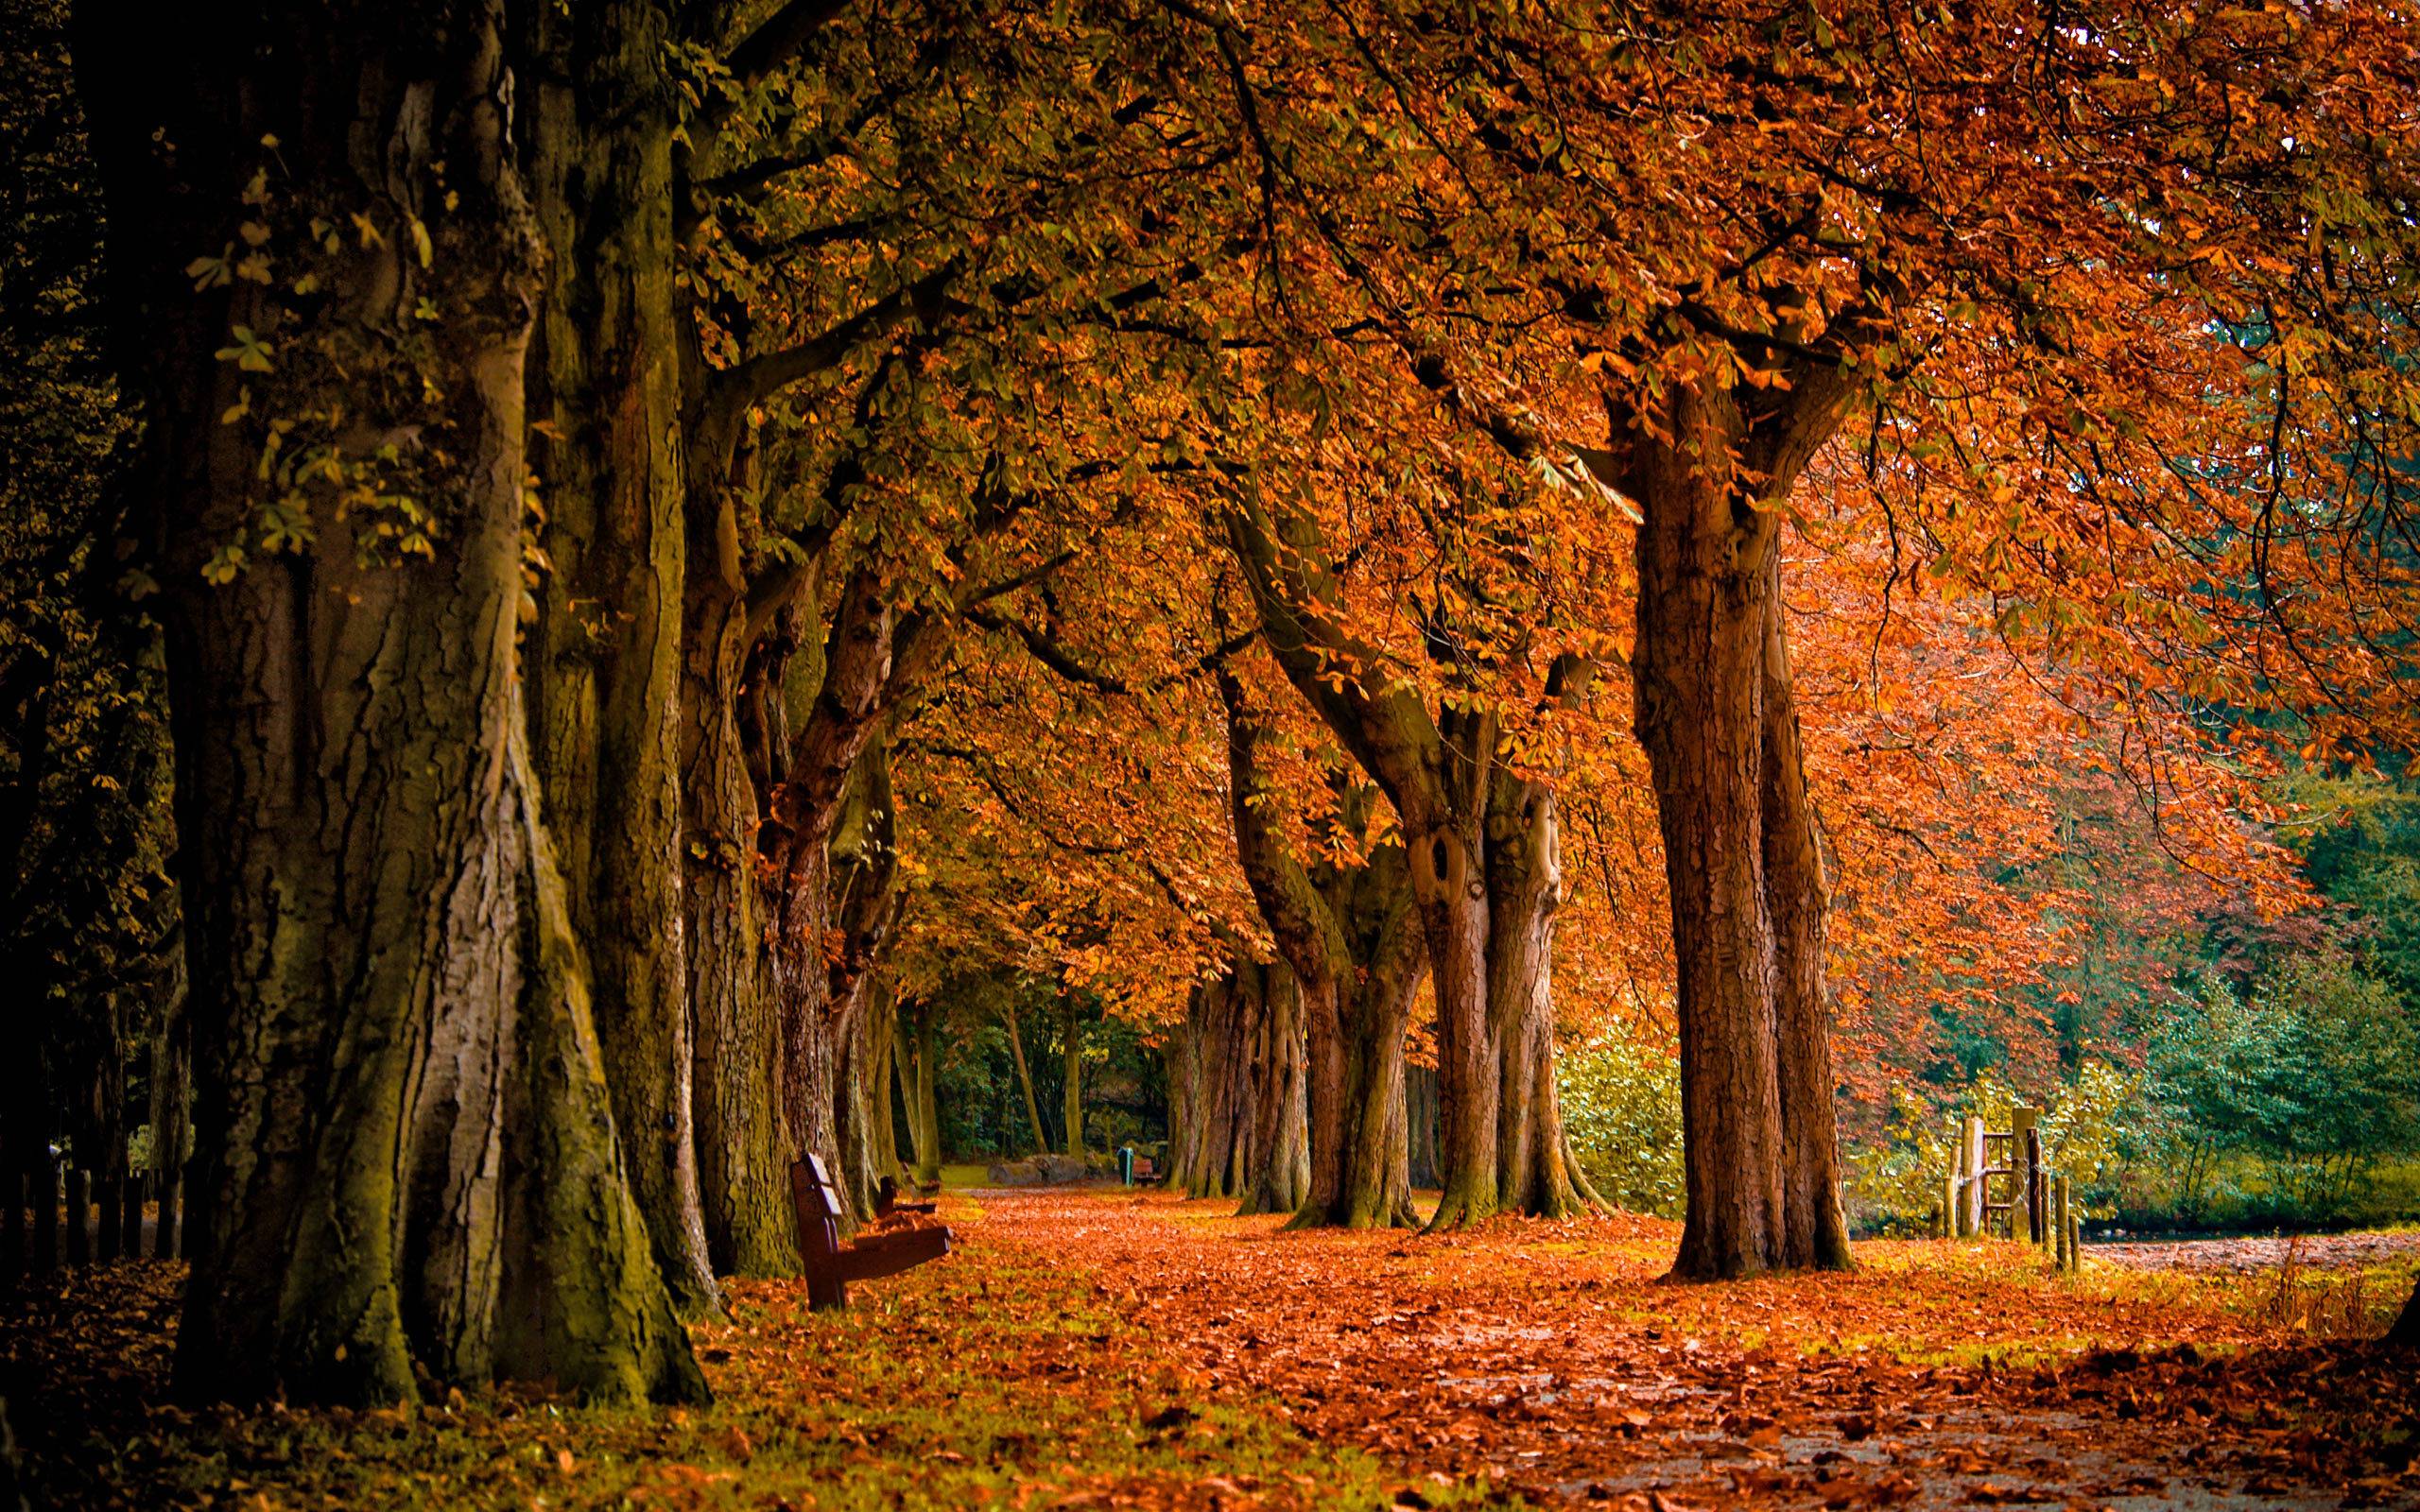 Awe Inspiring Autumn Wallpapers 2560x1600PX ~ Significant Free